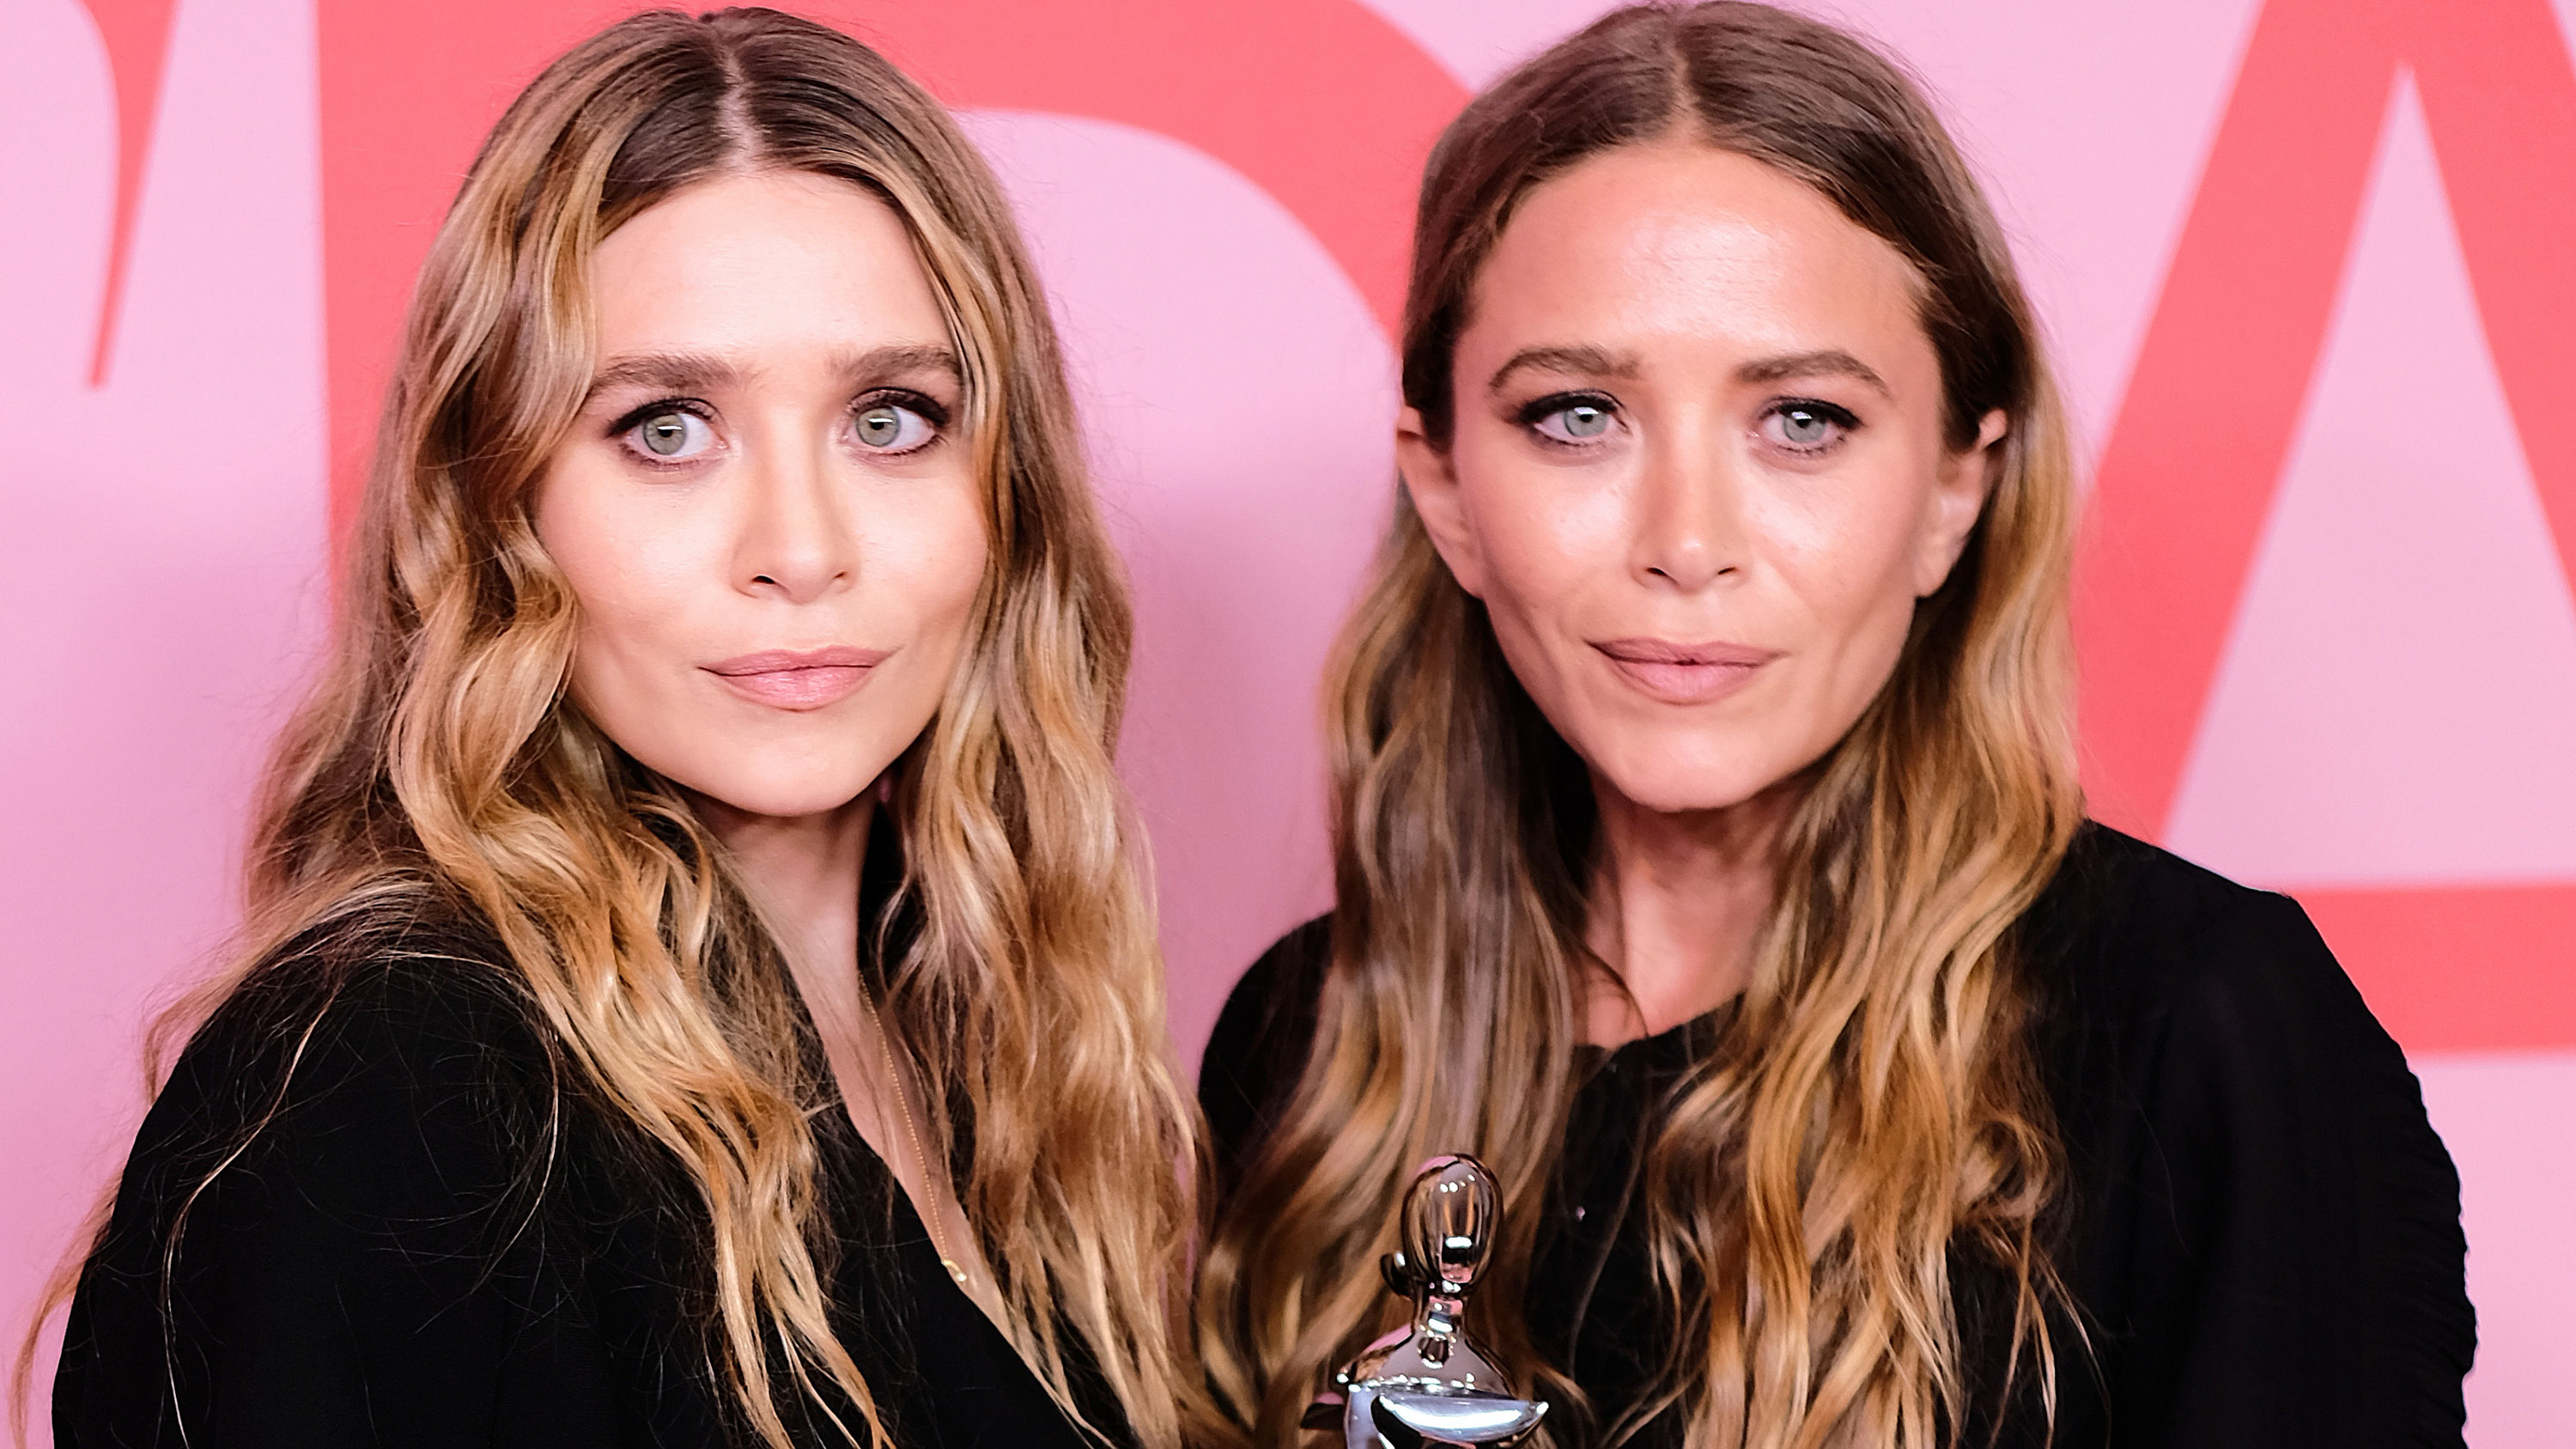 Ashley Olsen, left, and Mary-Kate Olsen pose for photos in 2019.